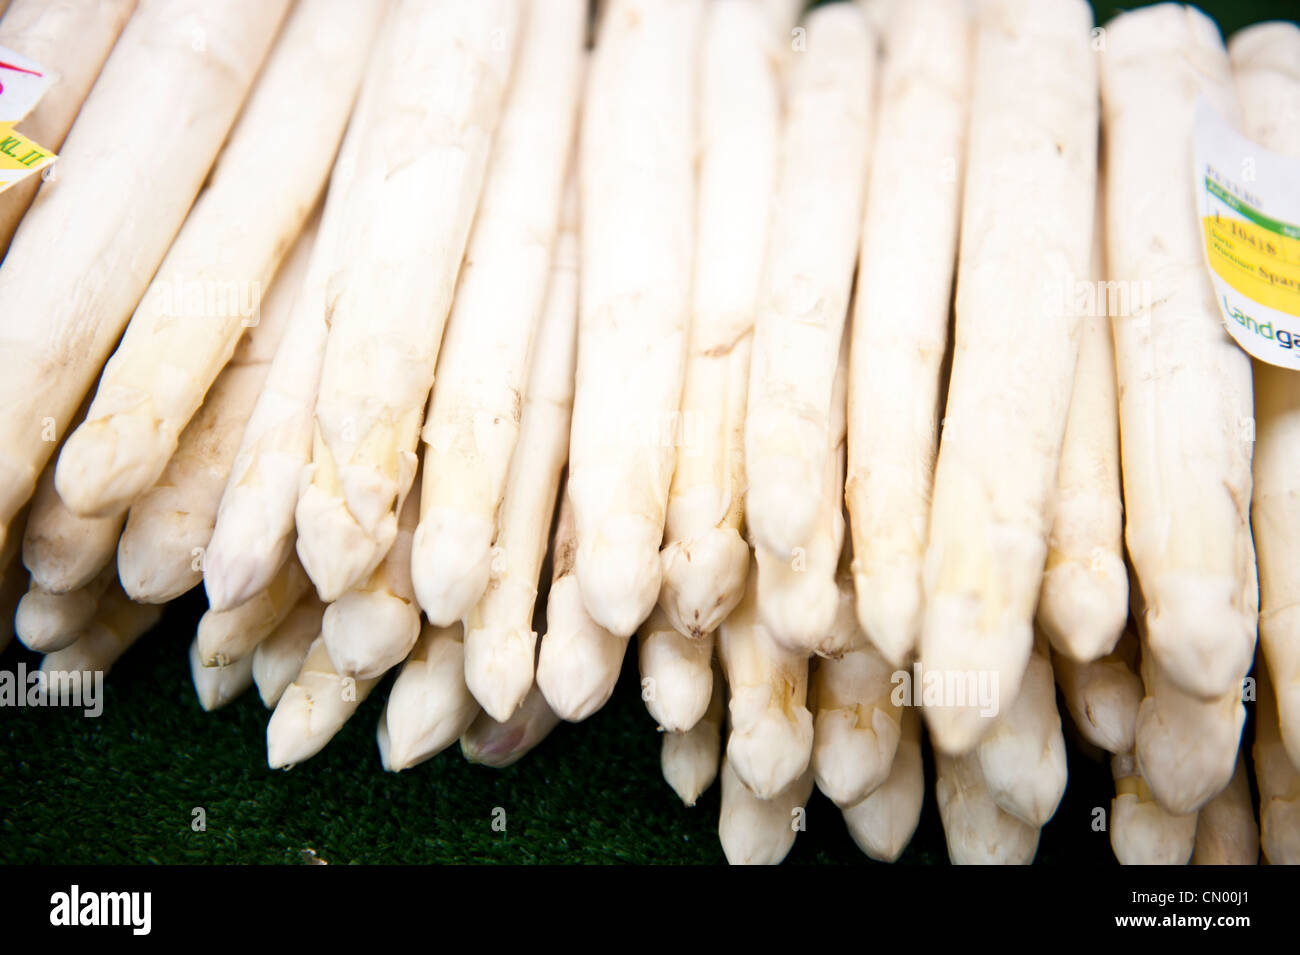 A bunch of white asparagus stacked on top of each other. Stock Photo